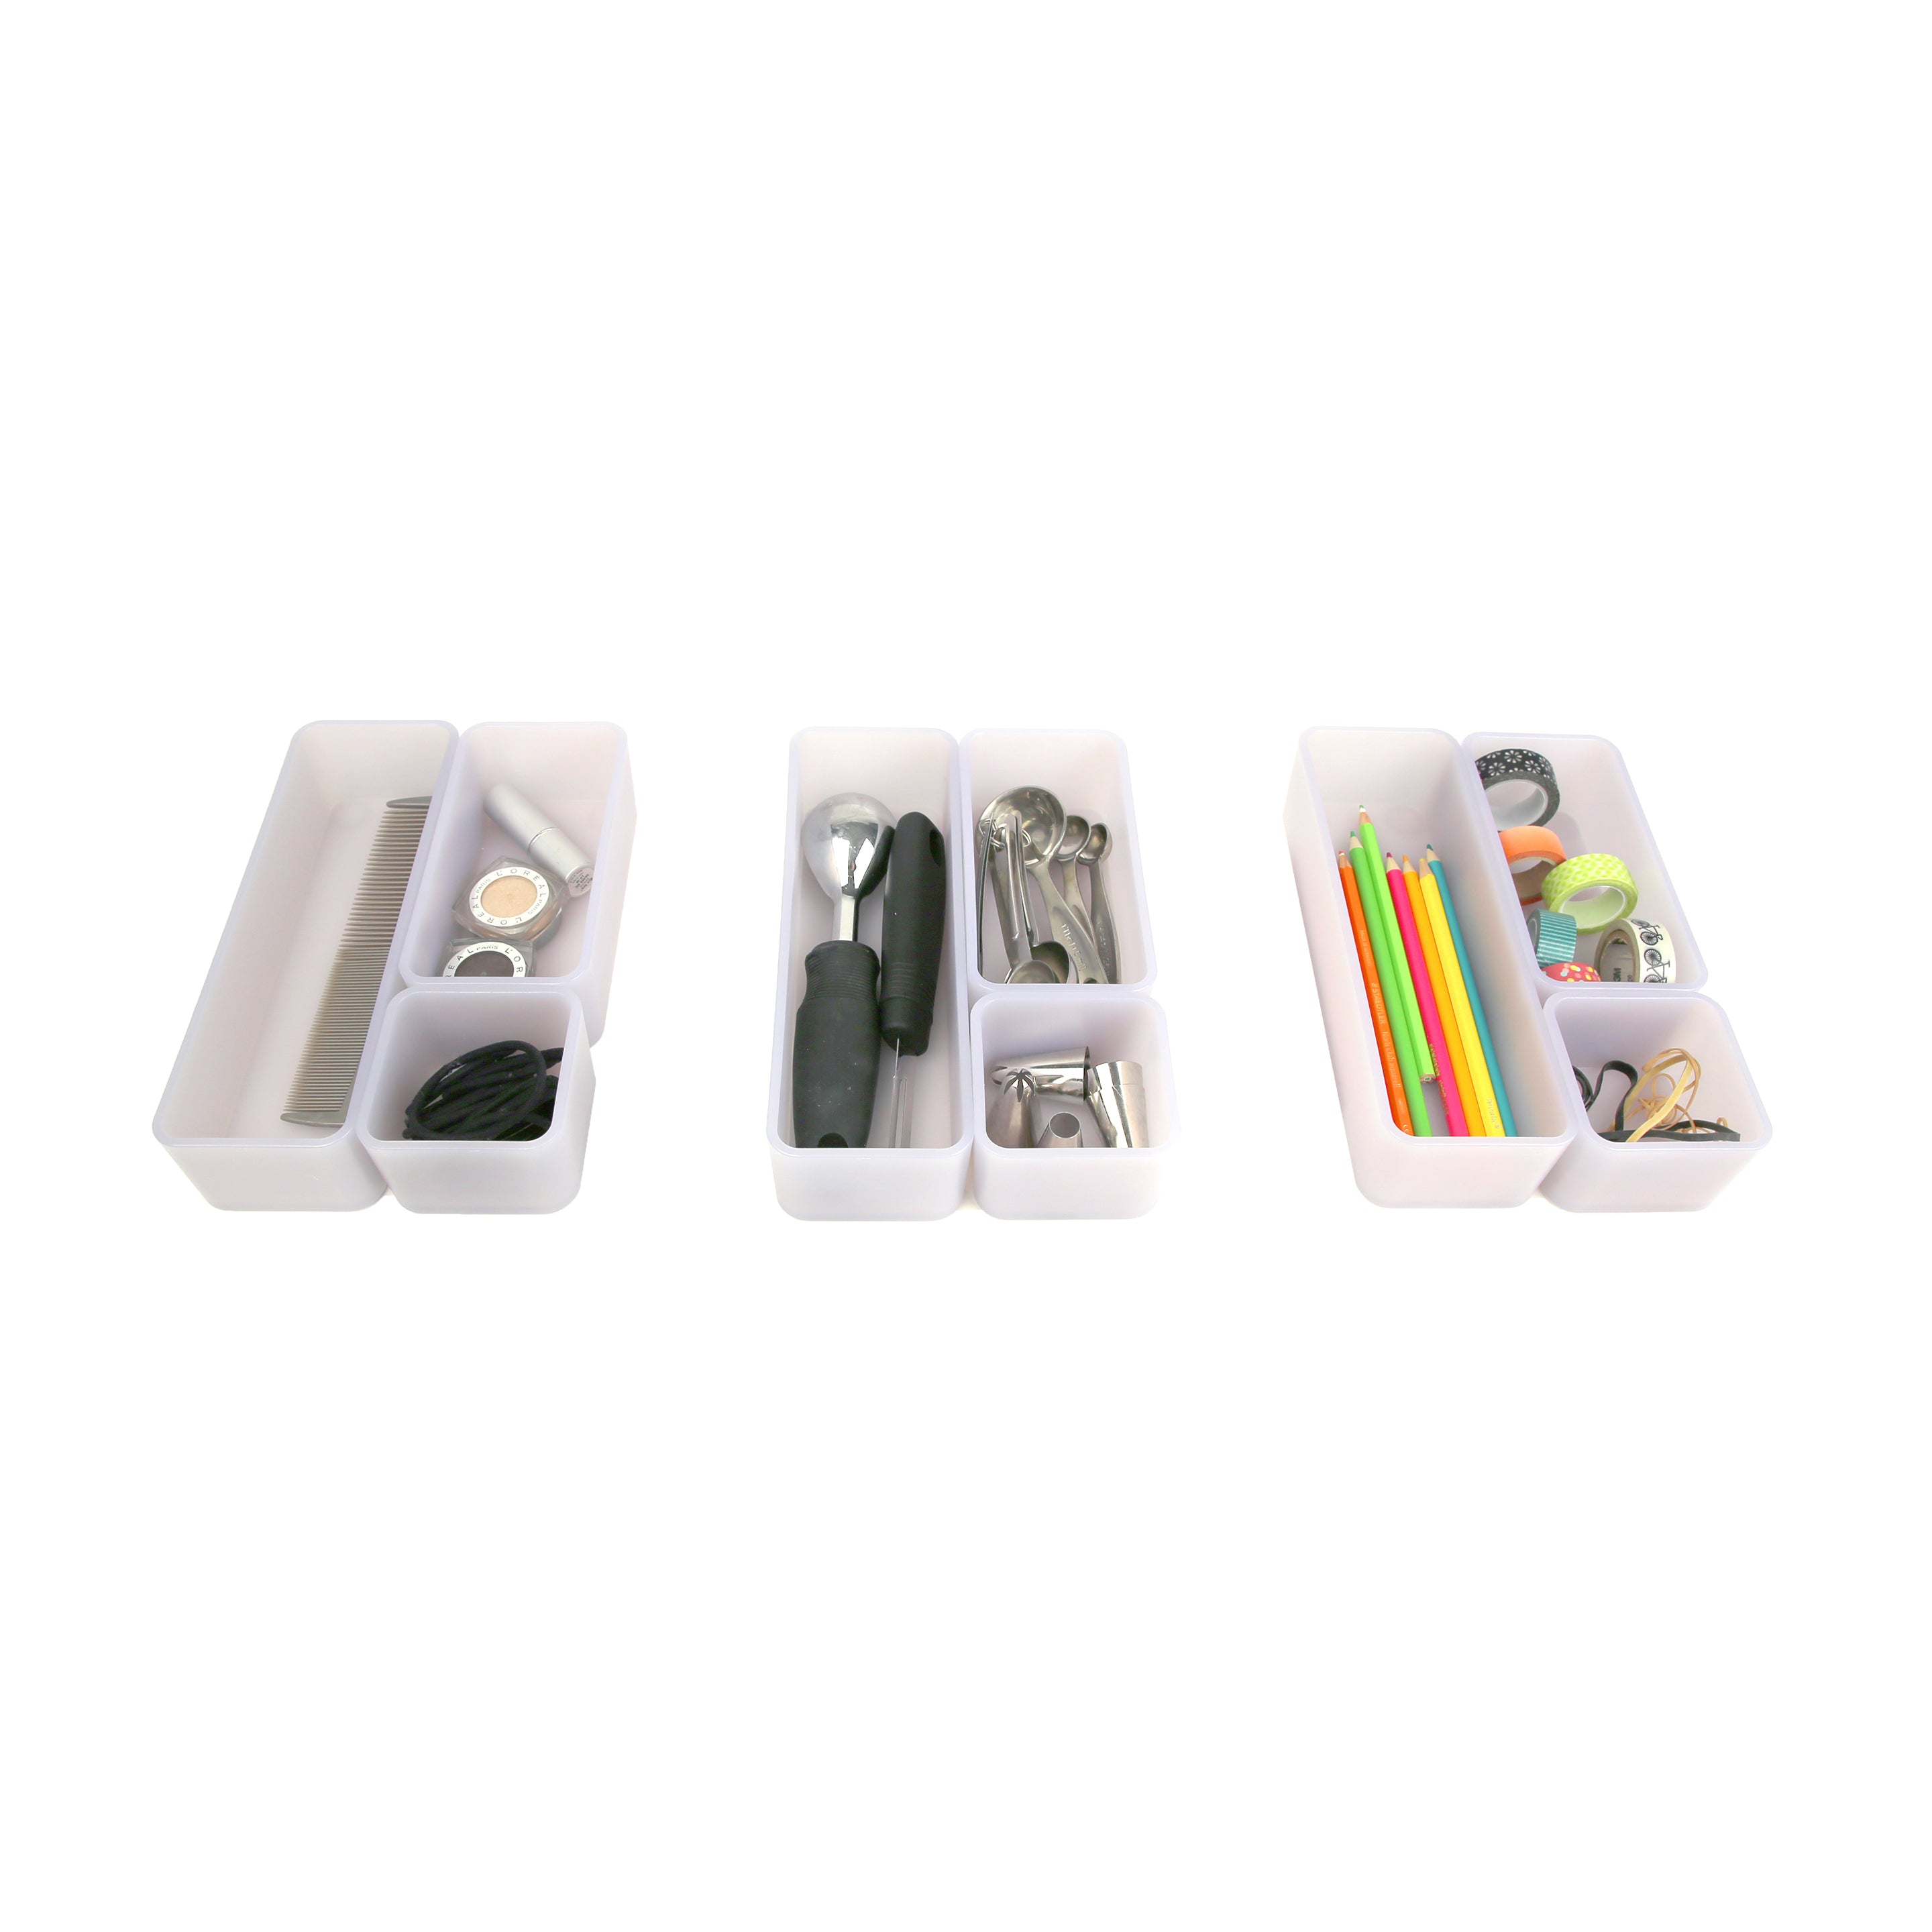 reSTAK recycled stackable organizing bins set of 3 3x12 + 3x6